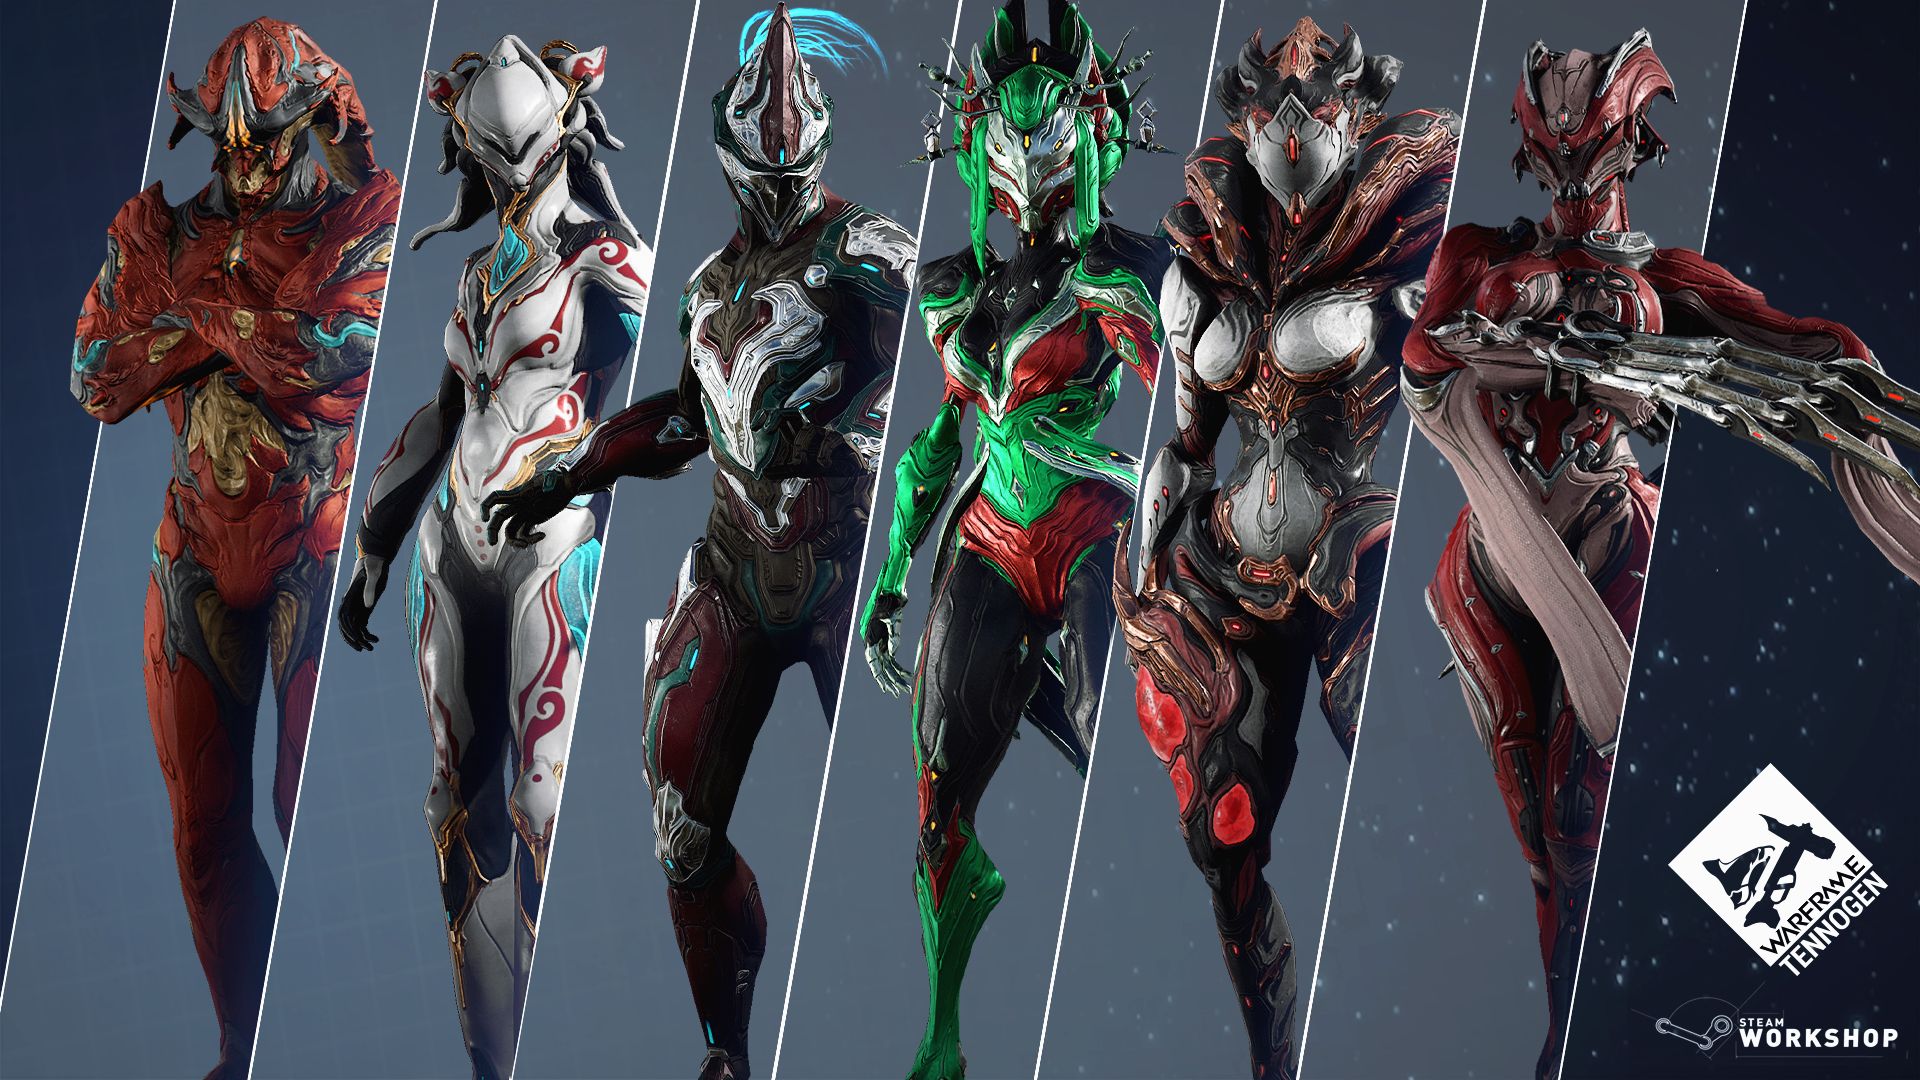 New Warframe 2020 Wallpapers